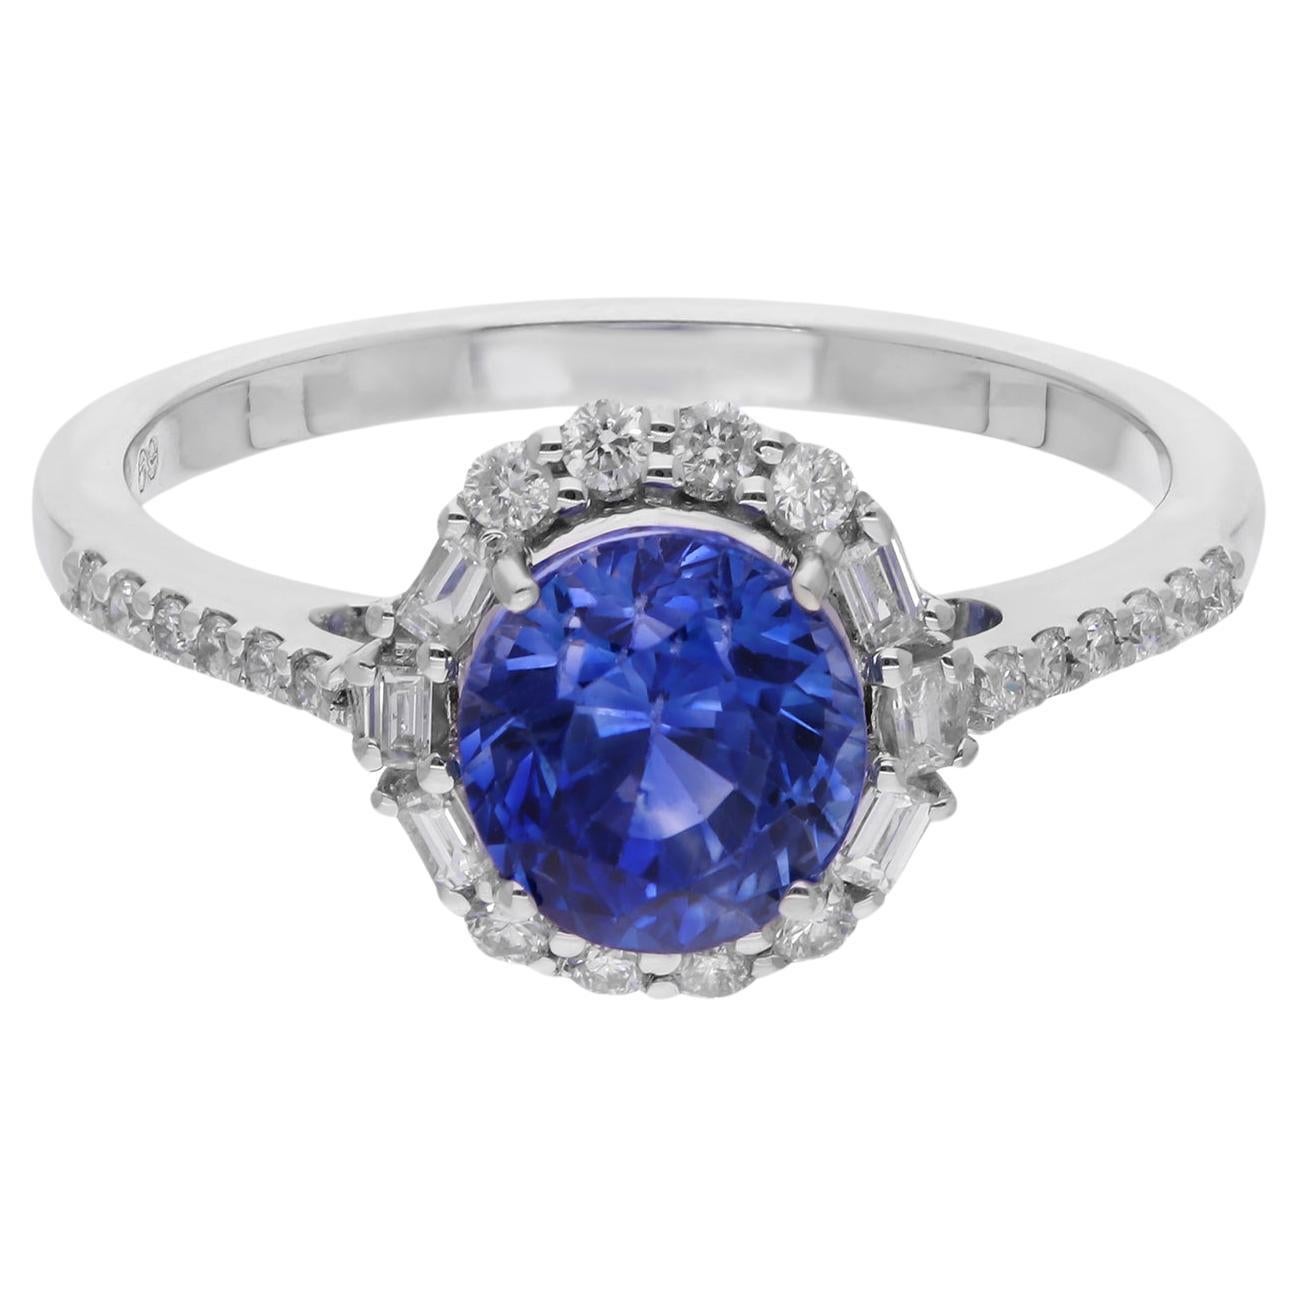 Blue Sapphire Gemstone Cocktail Ring Baguette Diamond 14 Kt White Gold Jewelry For Sale